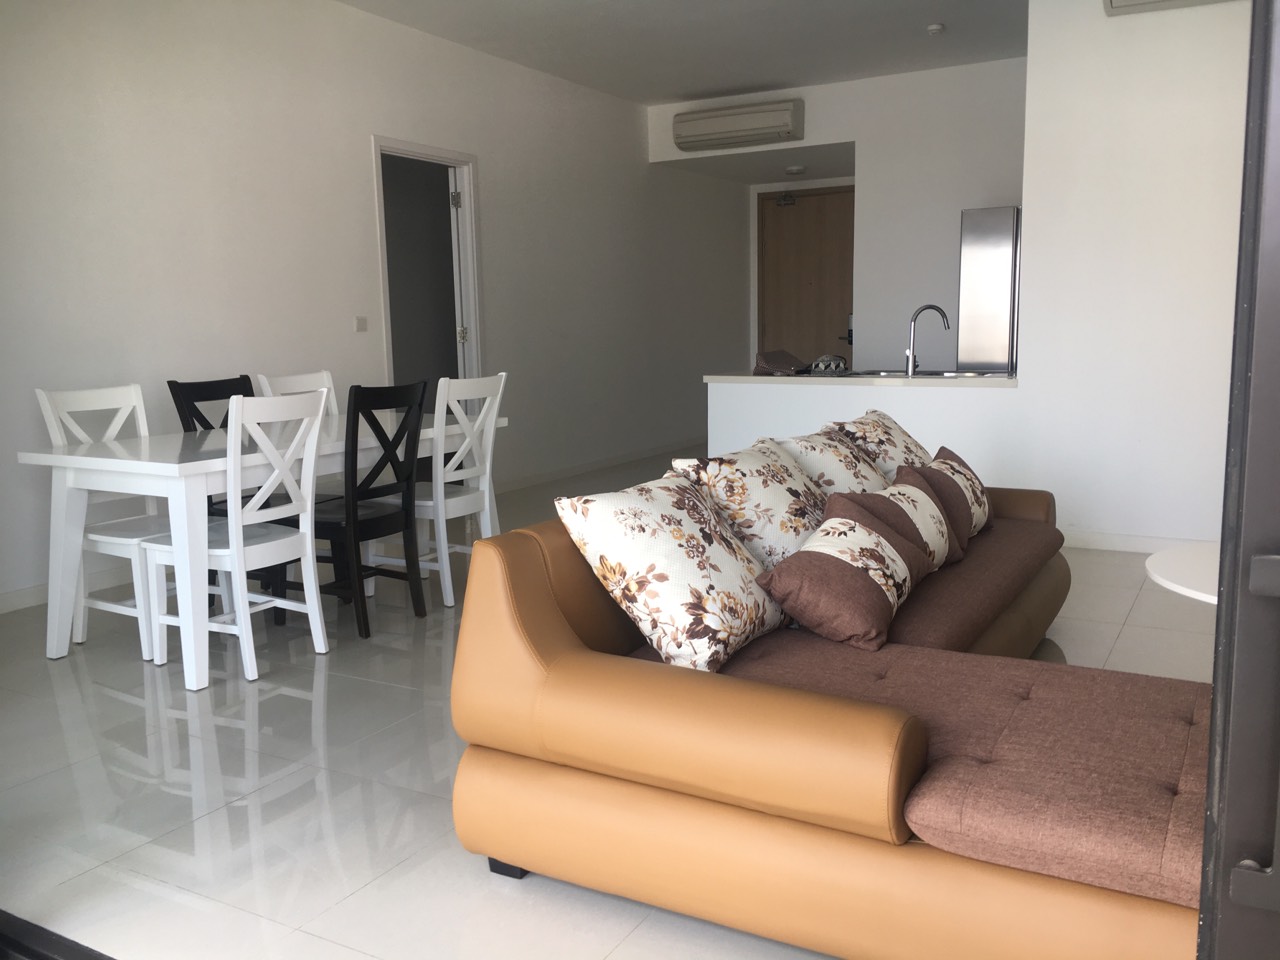 Estella Heights Apartment for rent in District 2, HCMC - 4 bedrooms